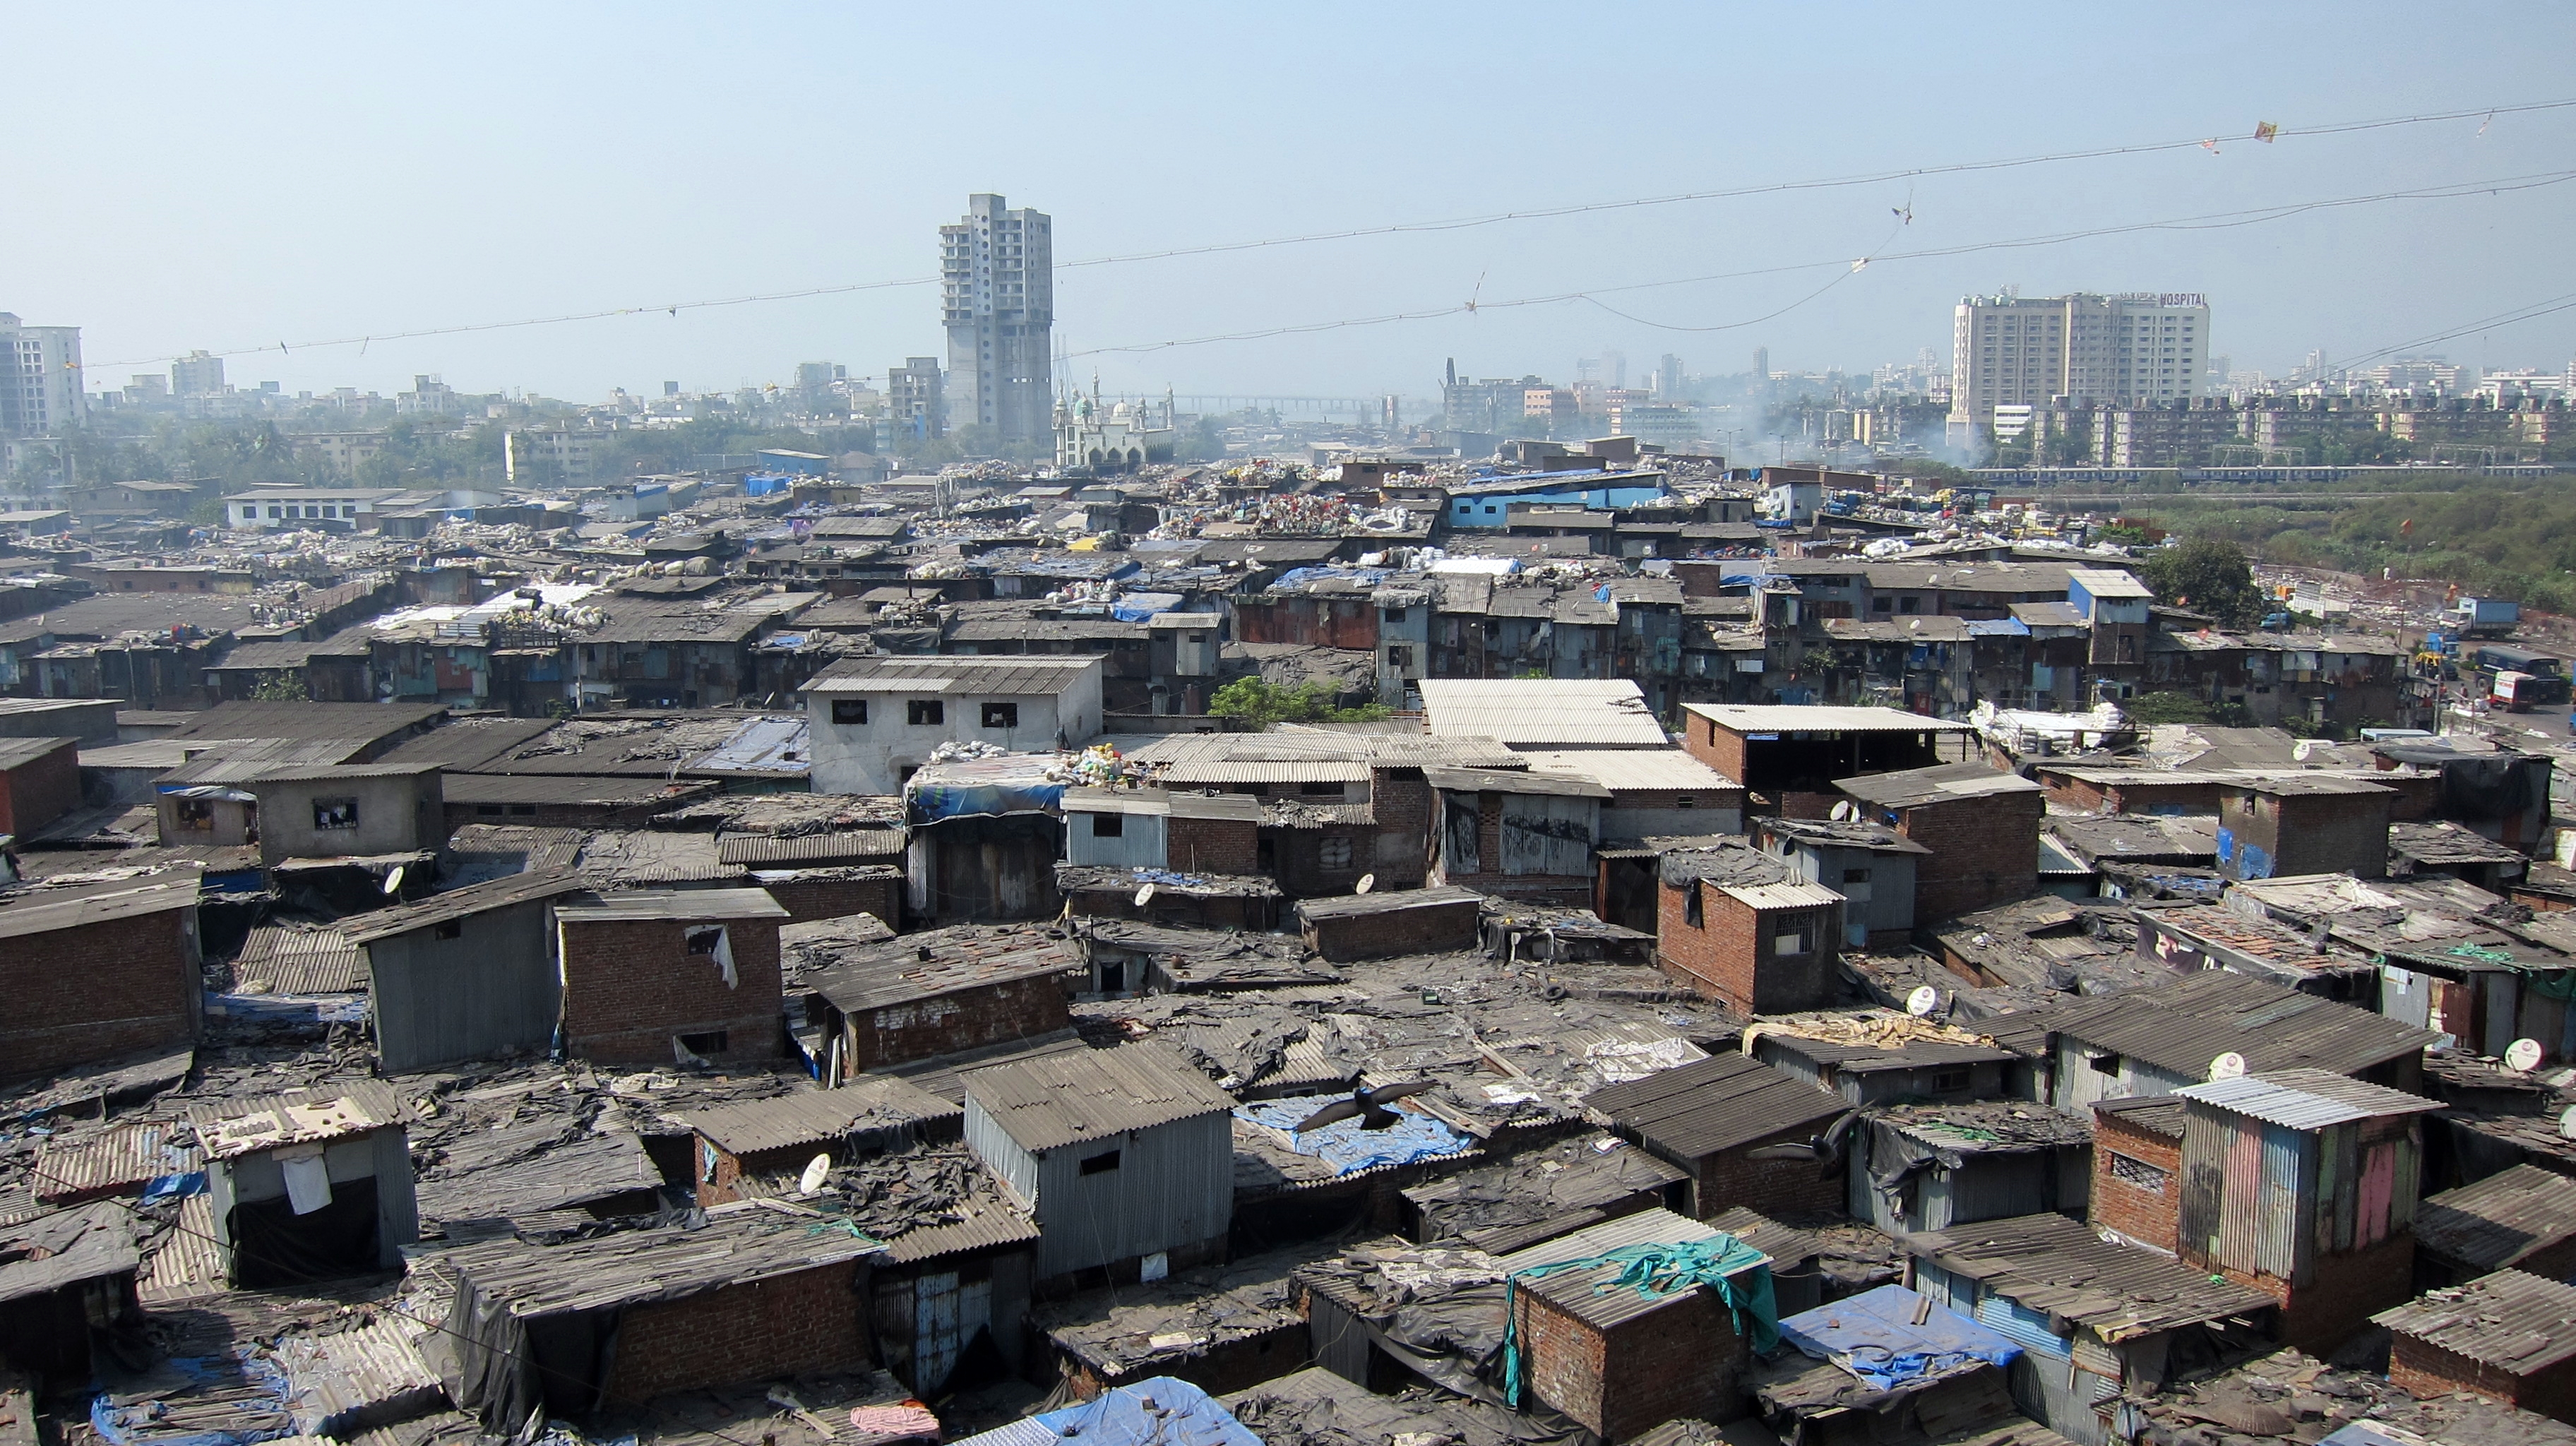  Tender conditions for Dharavi slum redevelopment were revised in public interest, not to favour Adani: Maharashtra to Bombay High Court